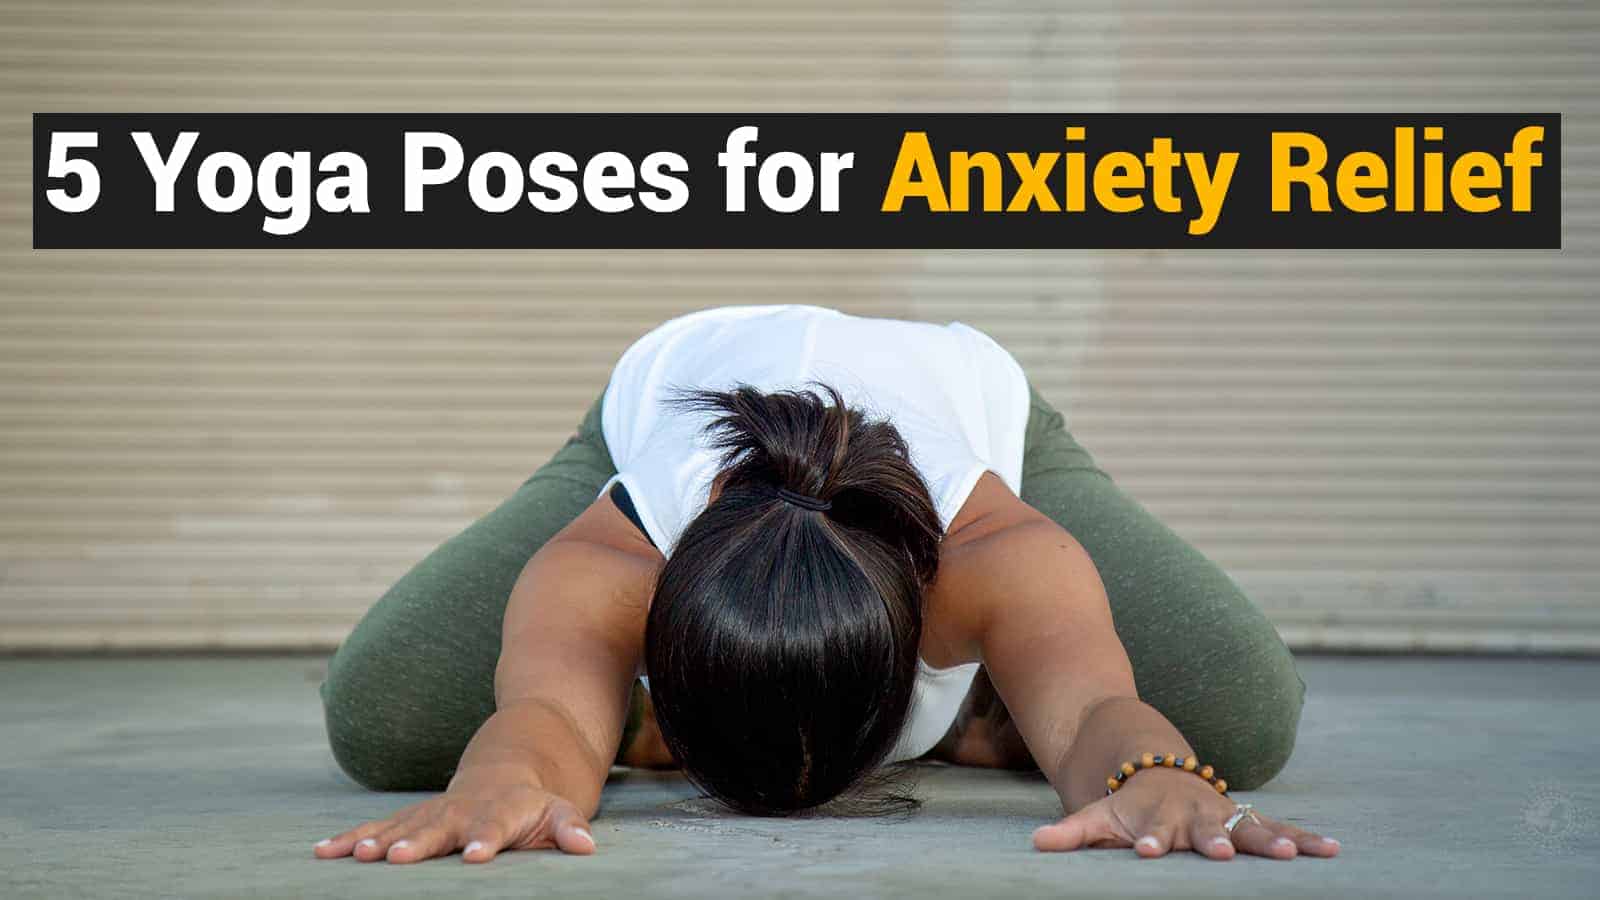 5 Yoga Poses for Anxiety Relief